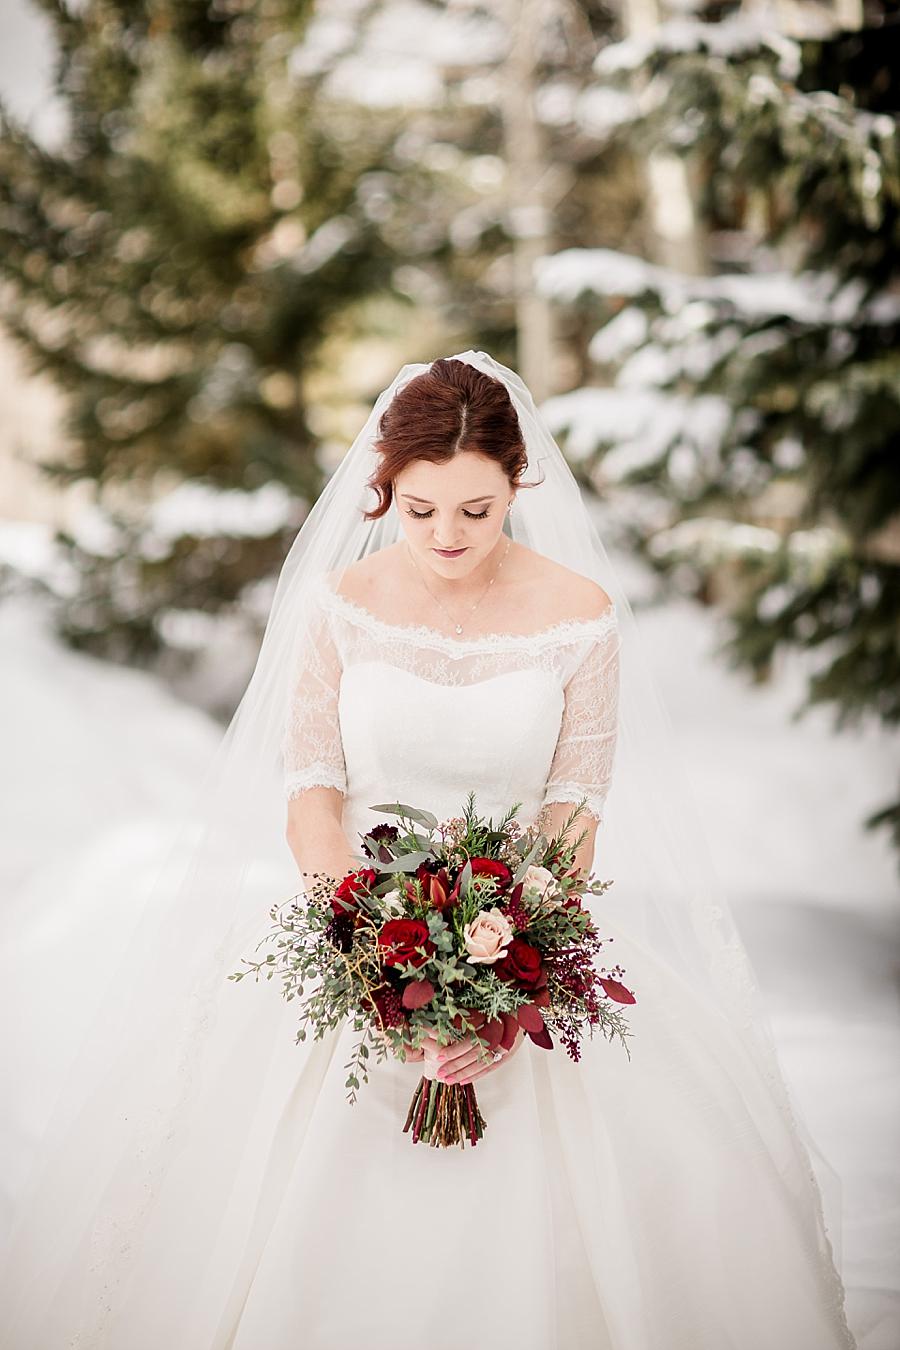 Looking at the bouquet at this Colorado Destination Wedding by Knoxville Wedding Photographer, Amanda May Photos.